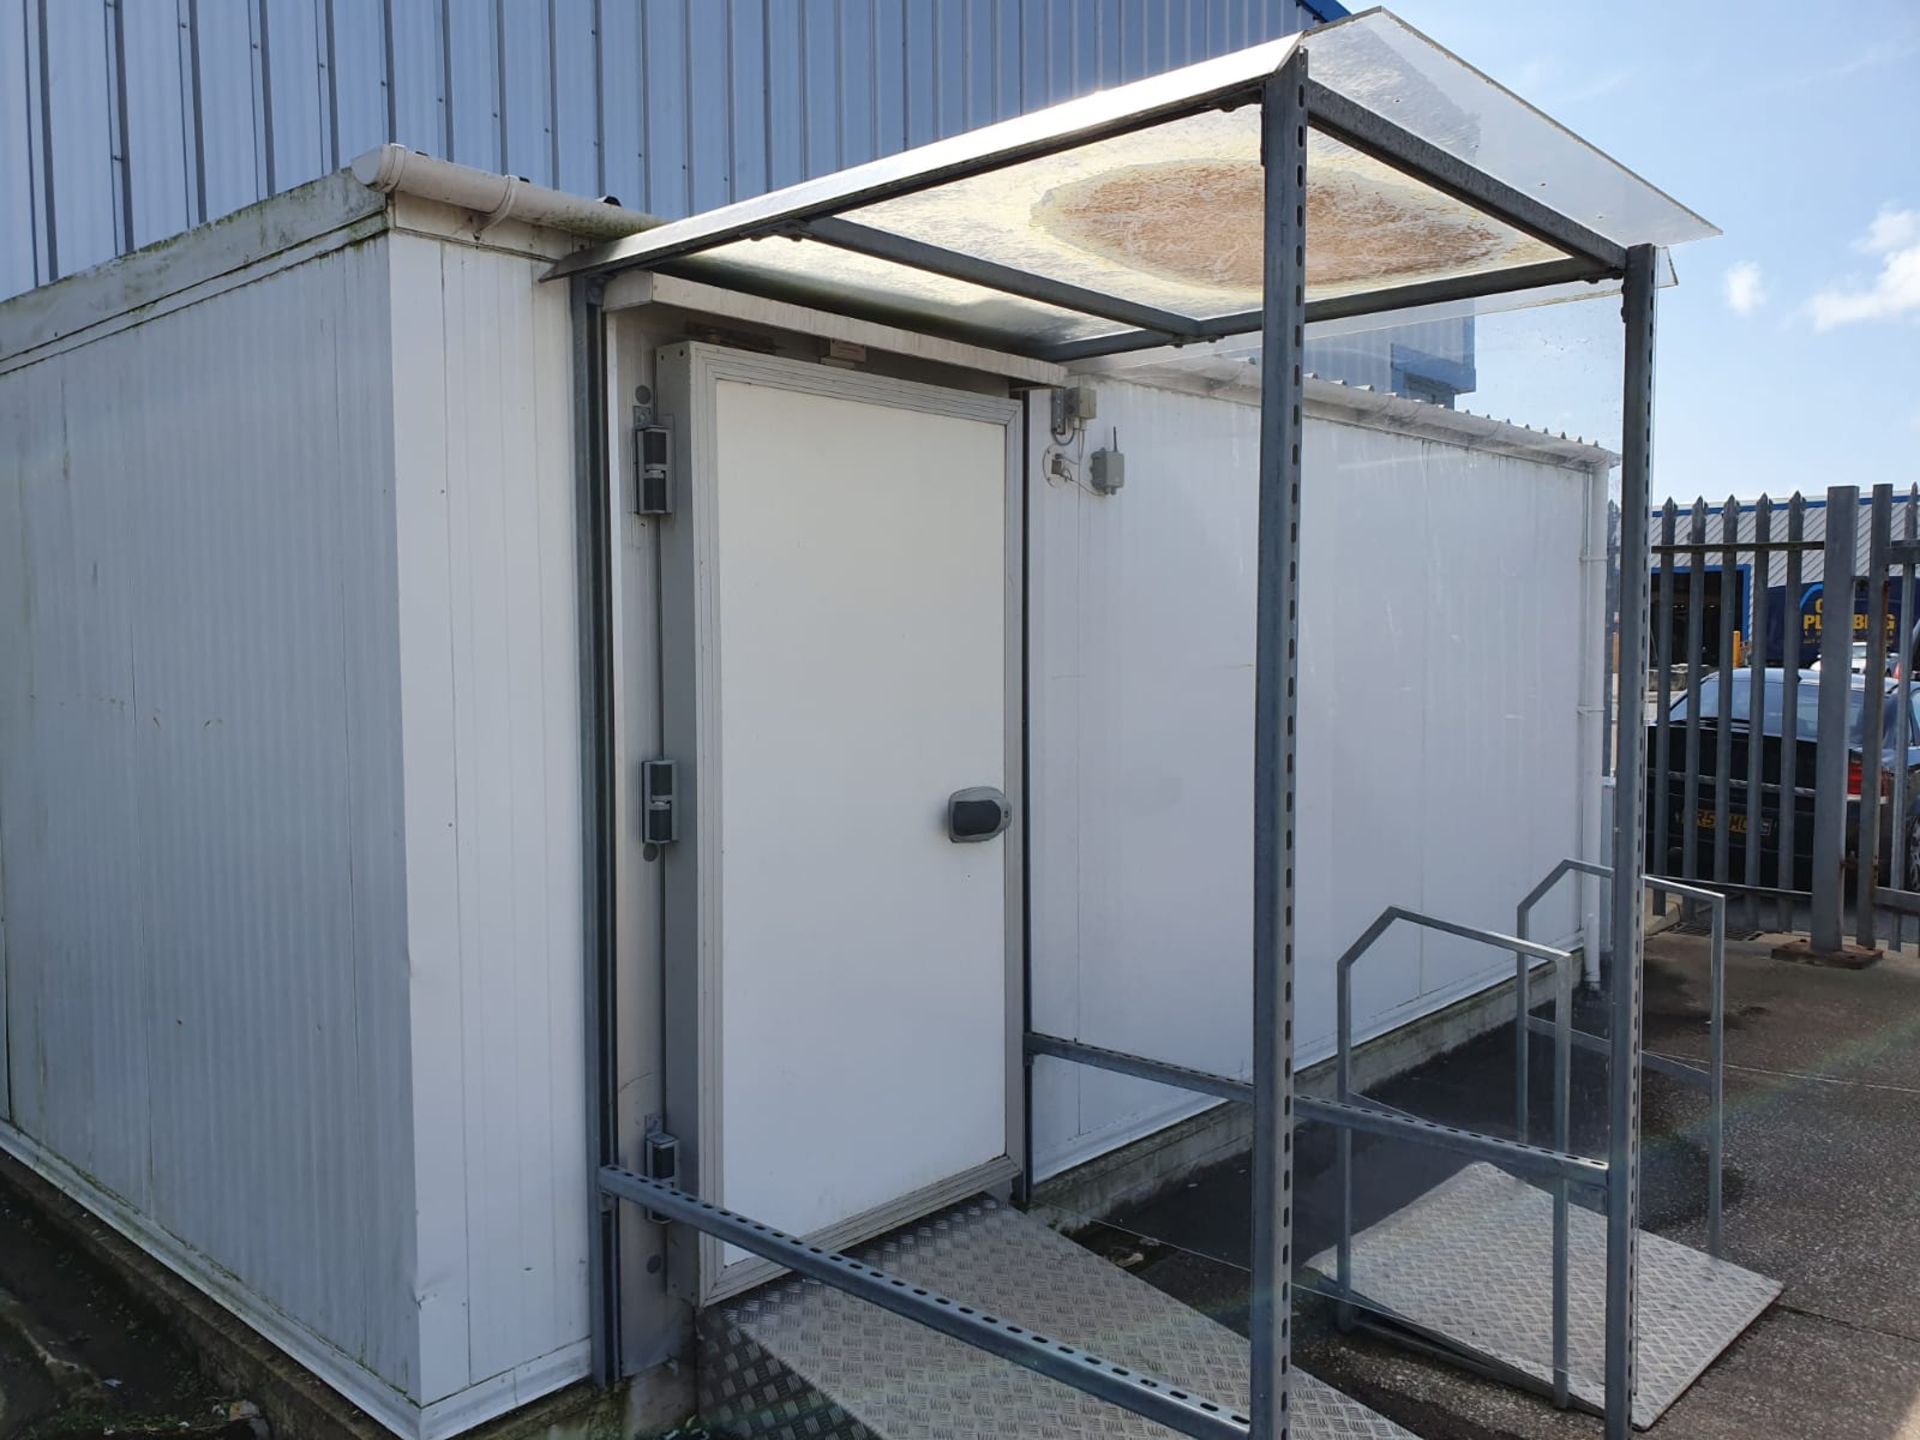 1 x External Refrigerated Cold Room Unit - Features Entrance Ramp With Overhead Canopy, Internal - Image 9 of 11